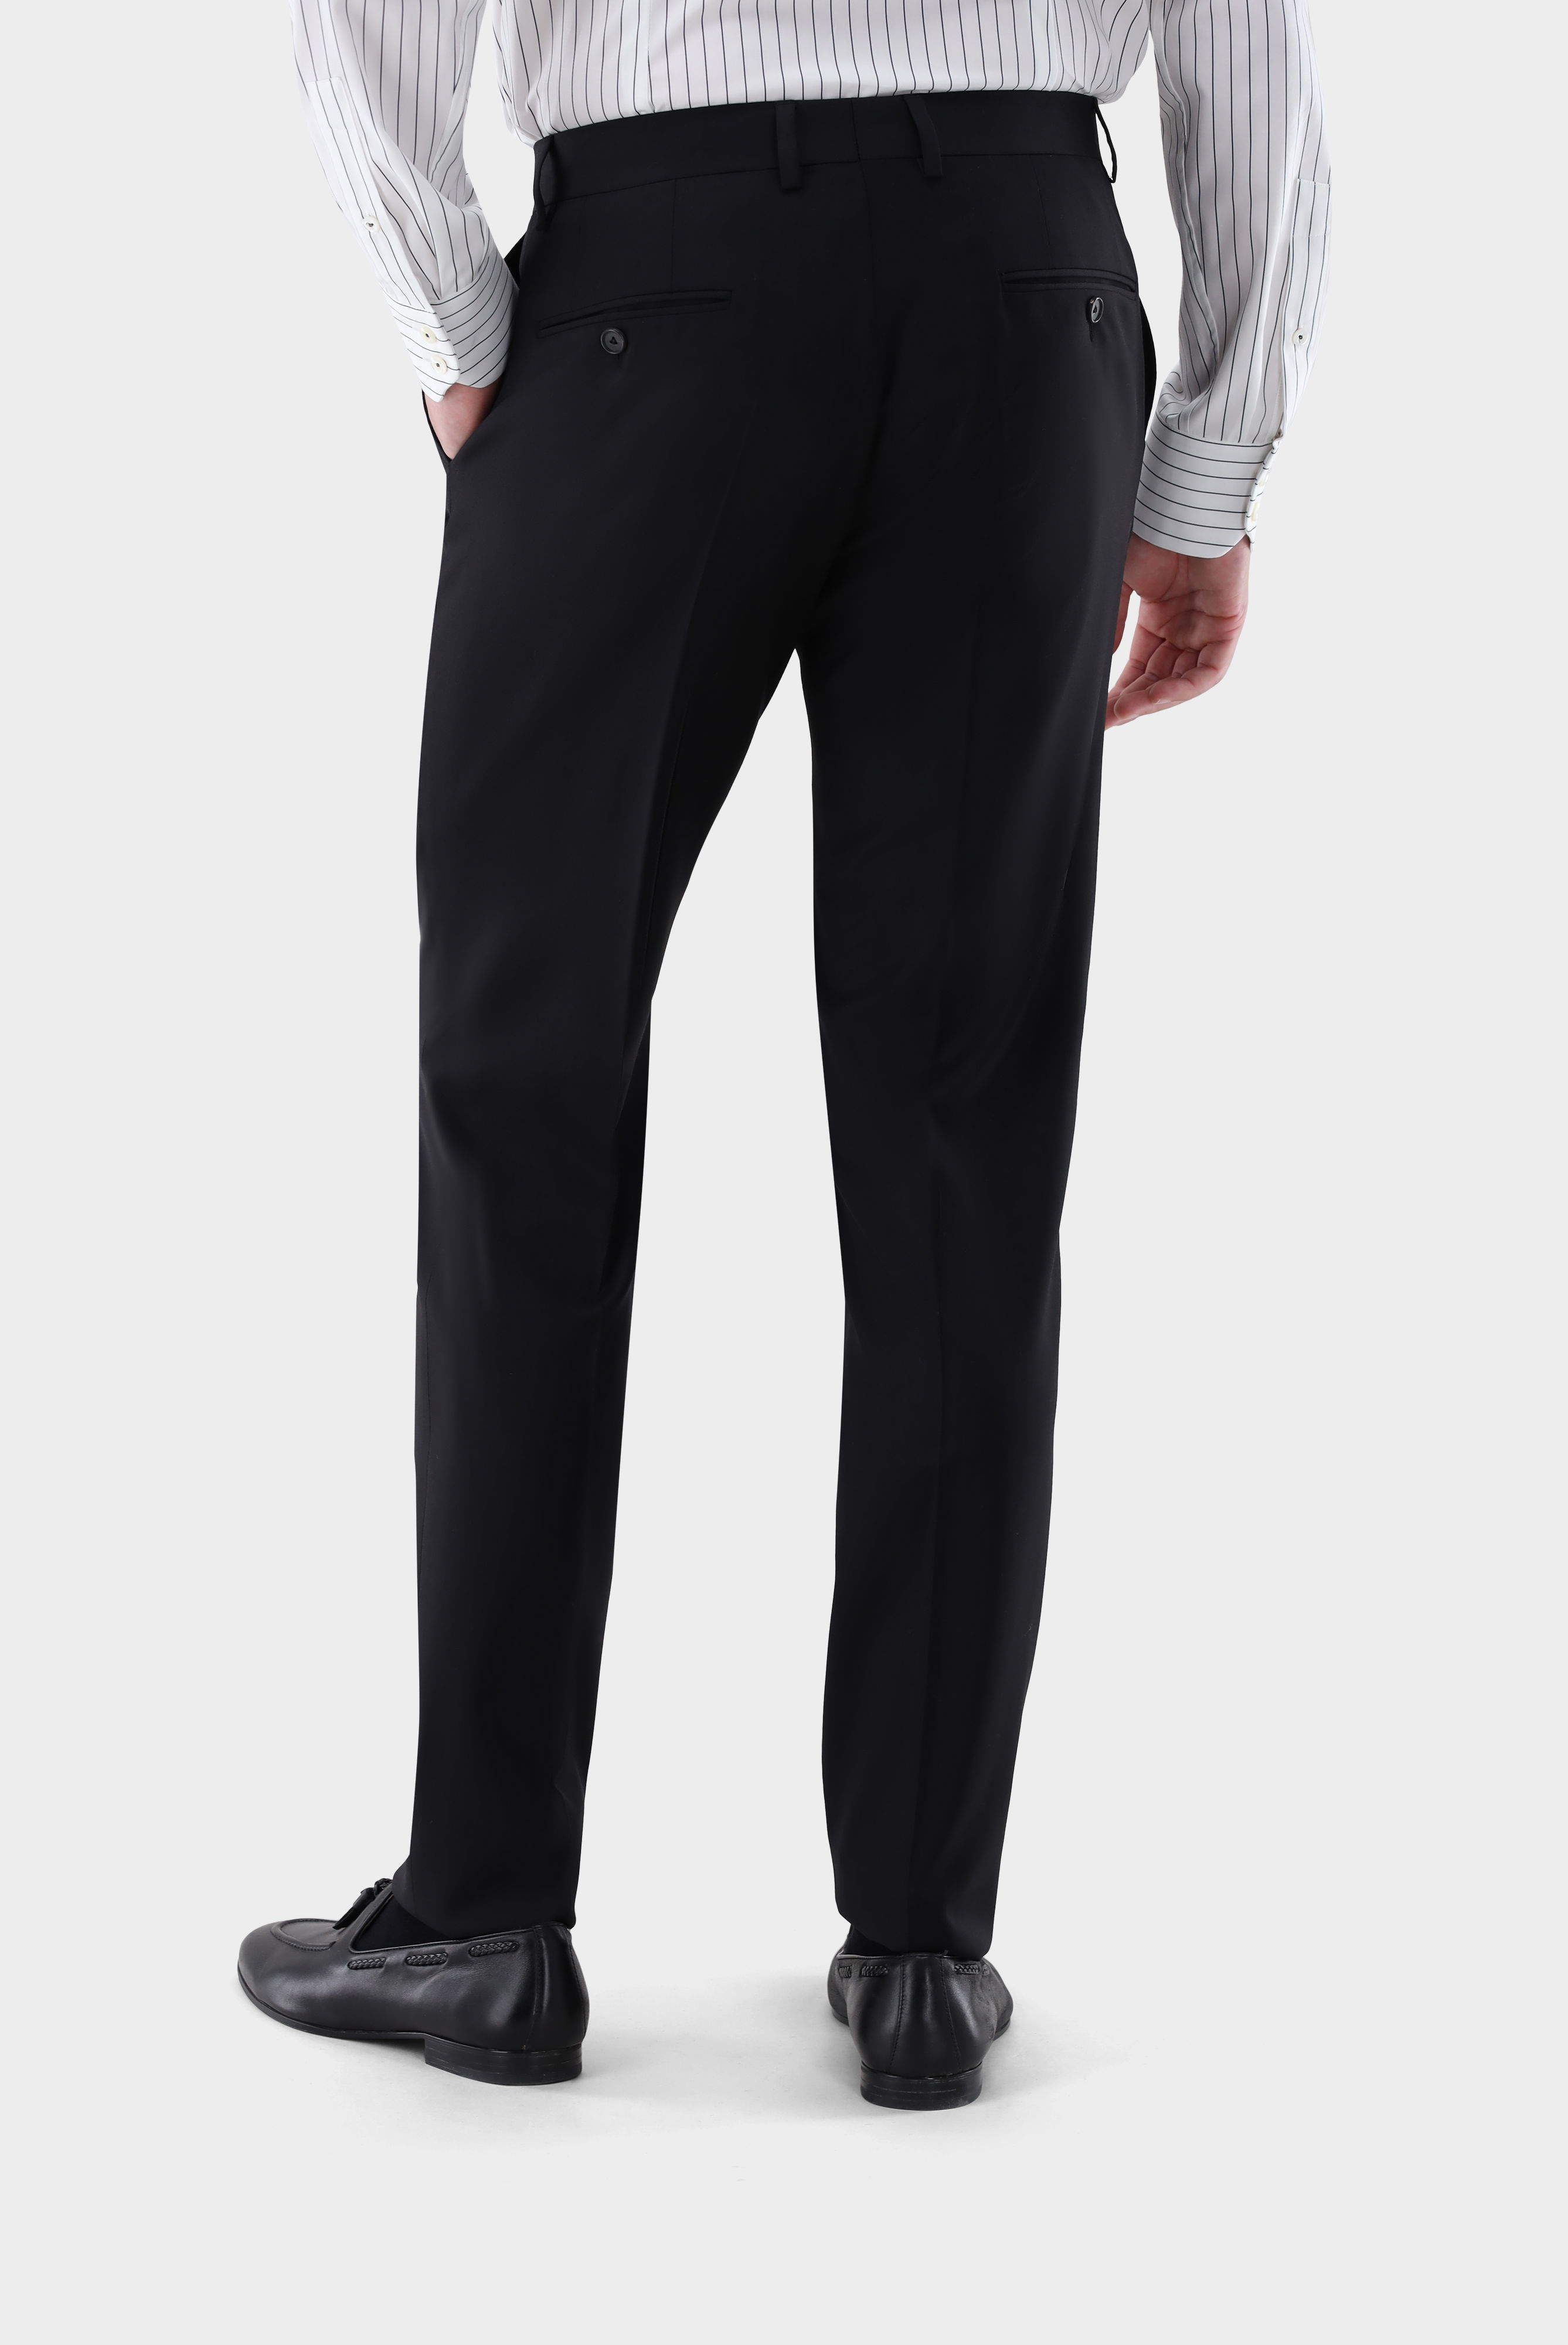 Jeans & Trousers+Wool Trousers Slim Fit+20.7880.16.H01010.099.90